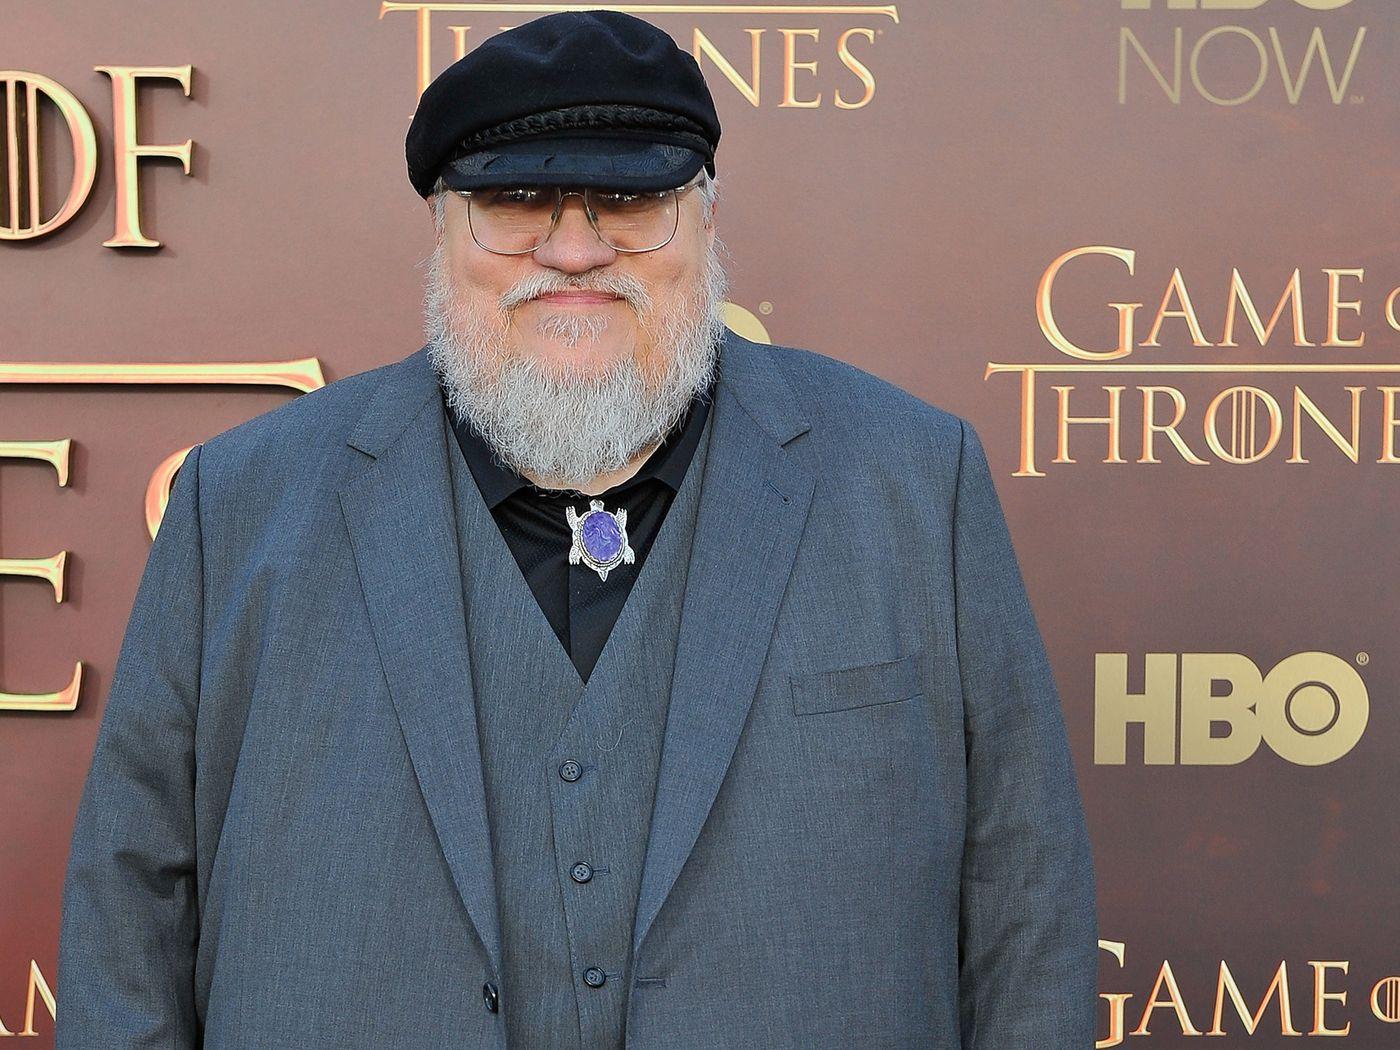 Game of Thrones author George R.R. Martin publishes new chapter